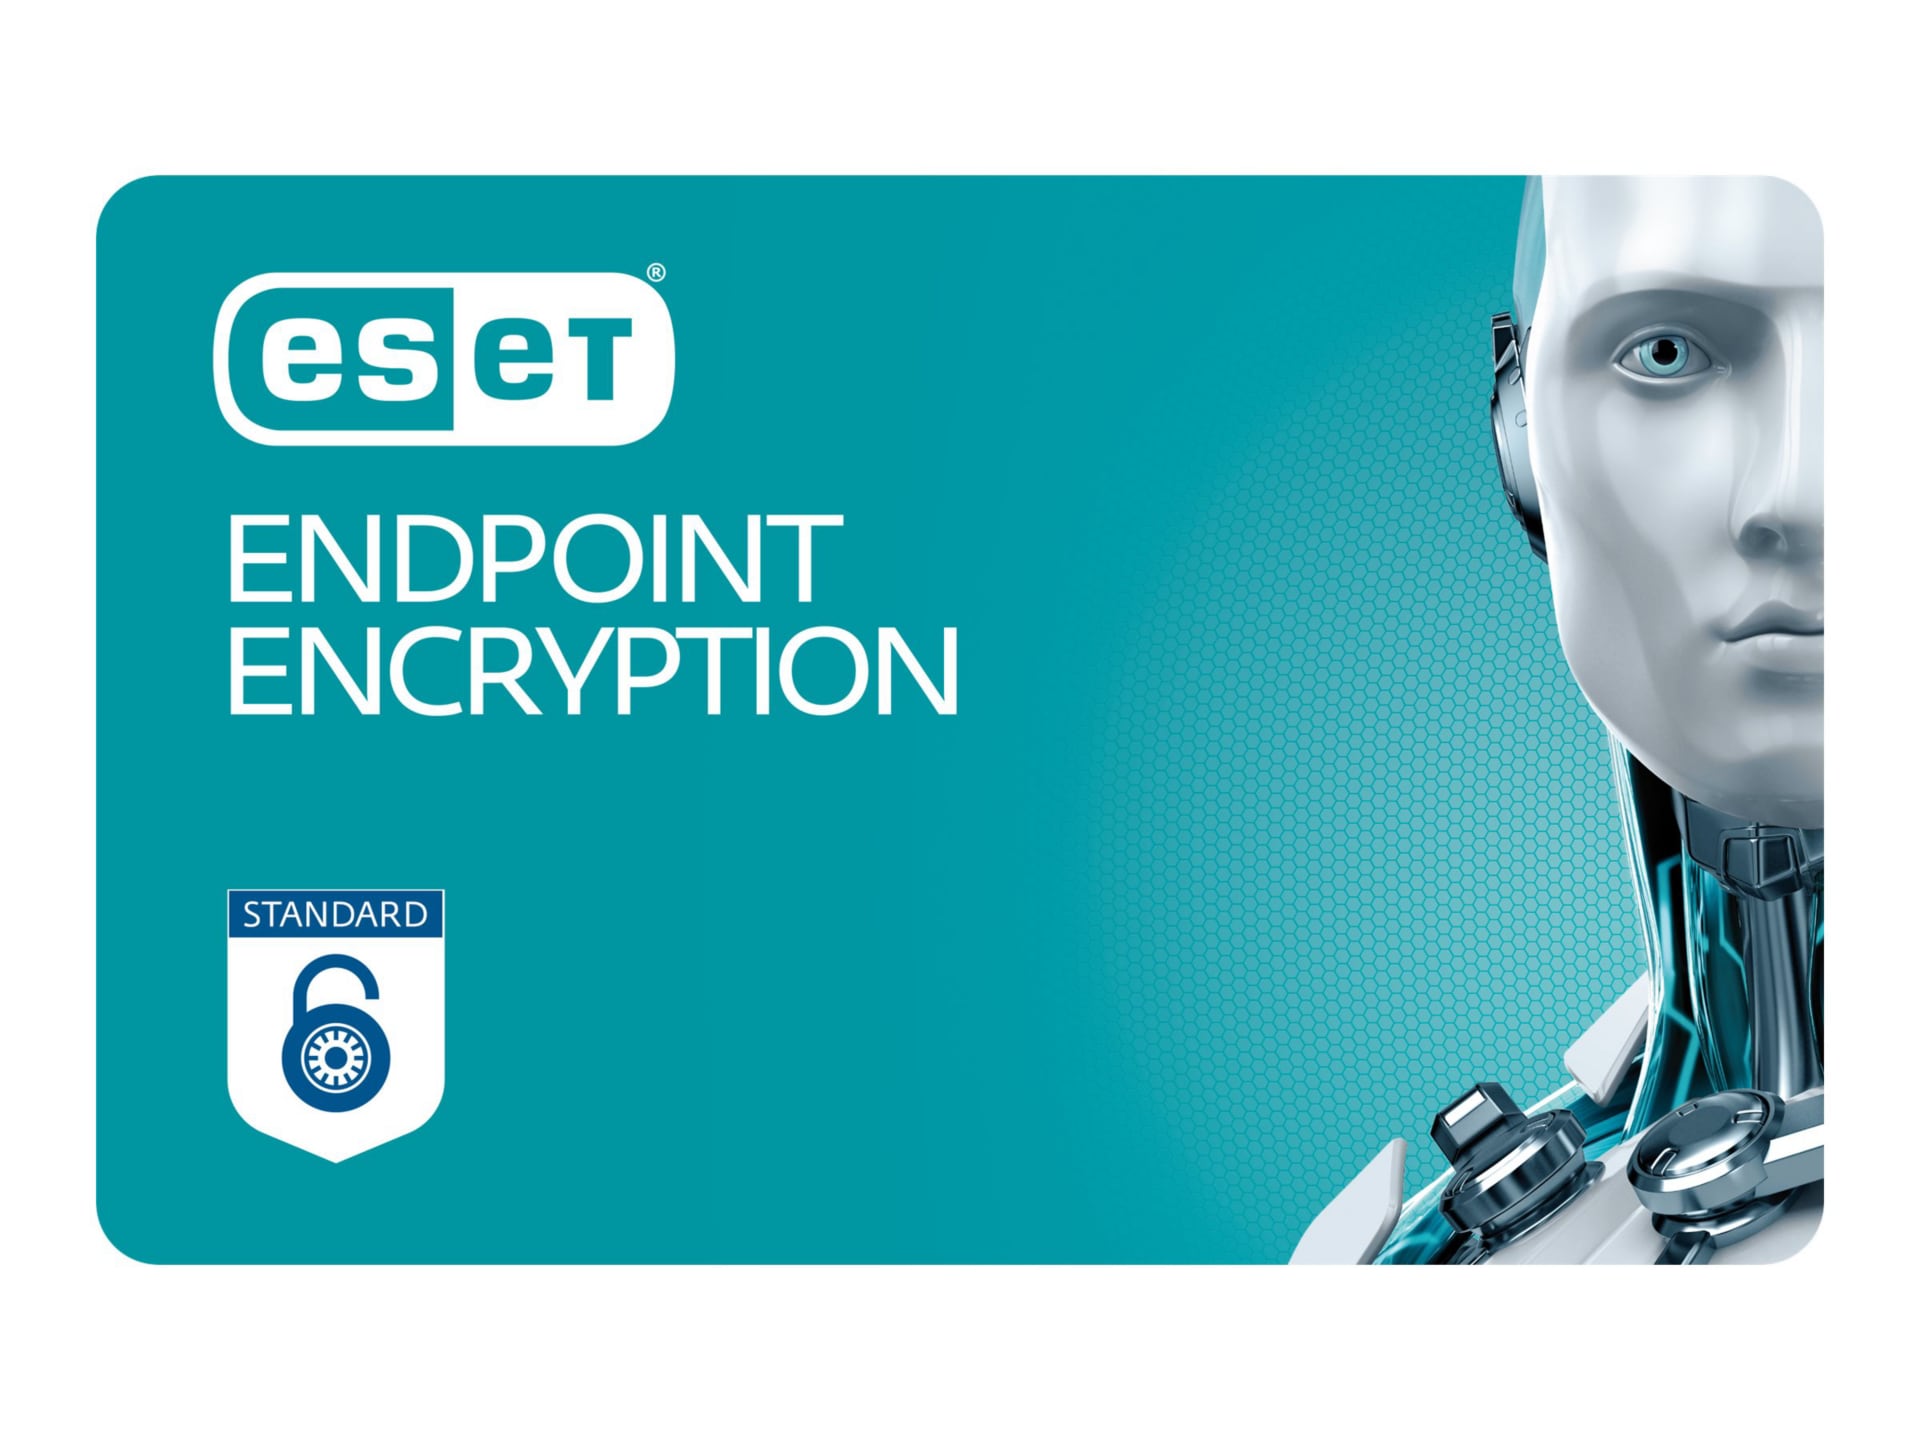 ESET Endpoint Encryption Standard Edition - subscription license (3 years)